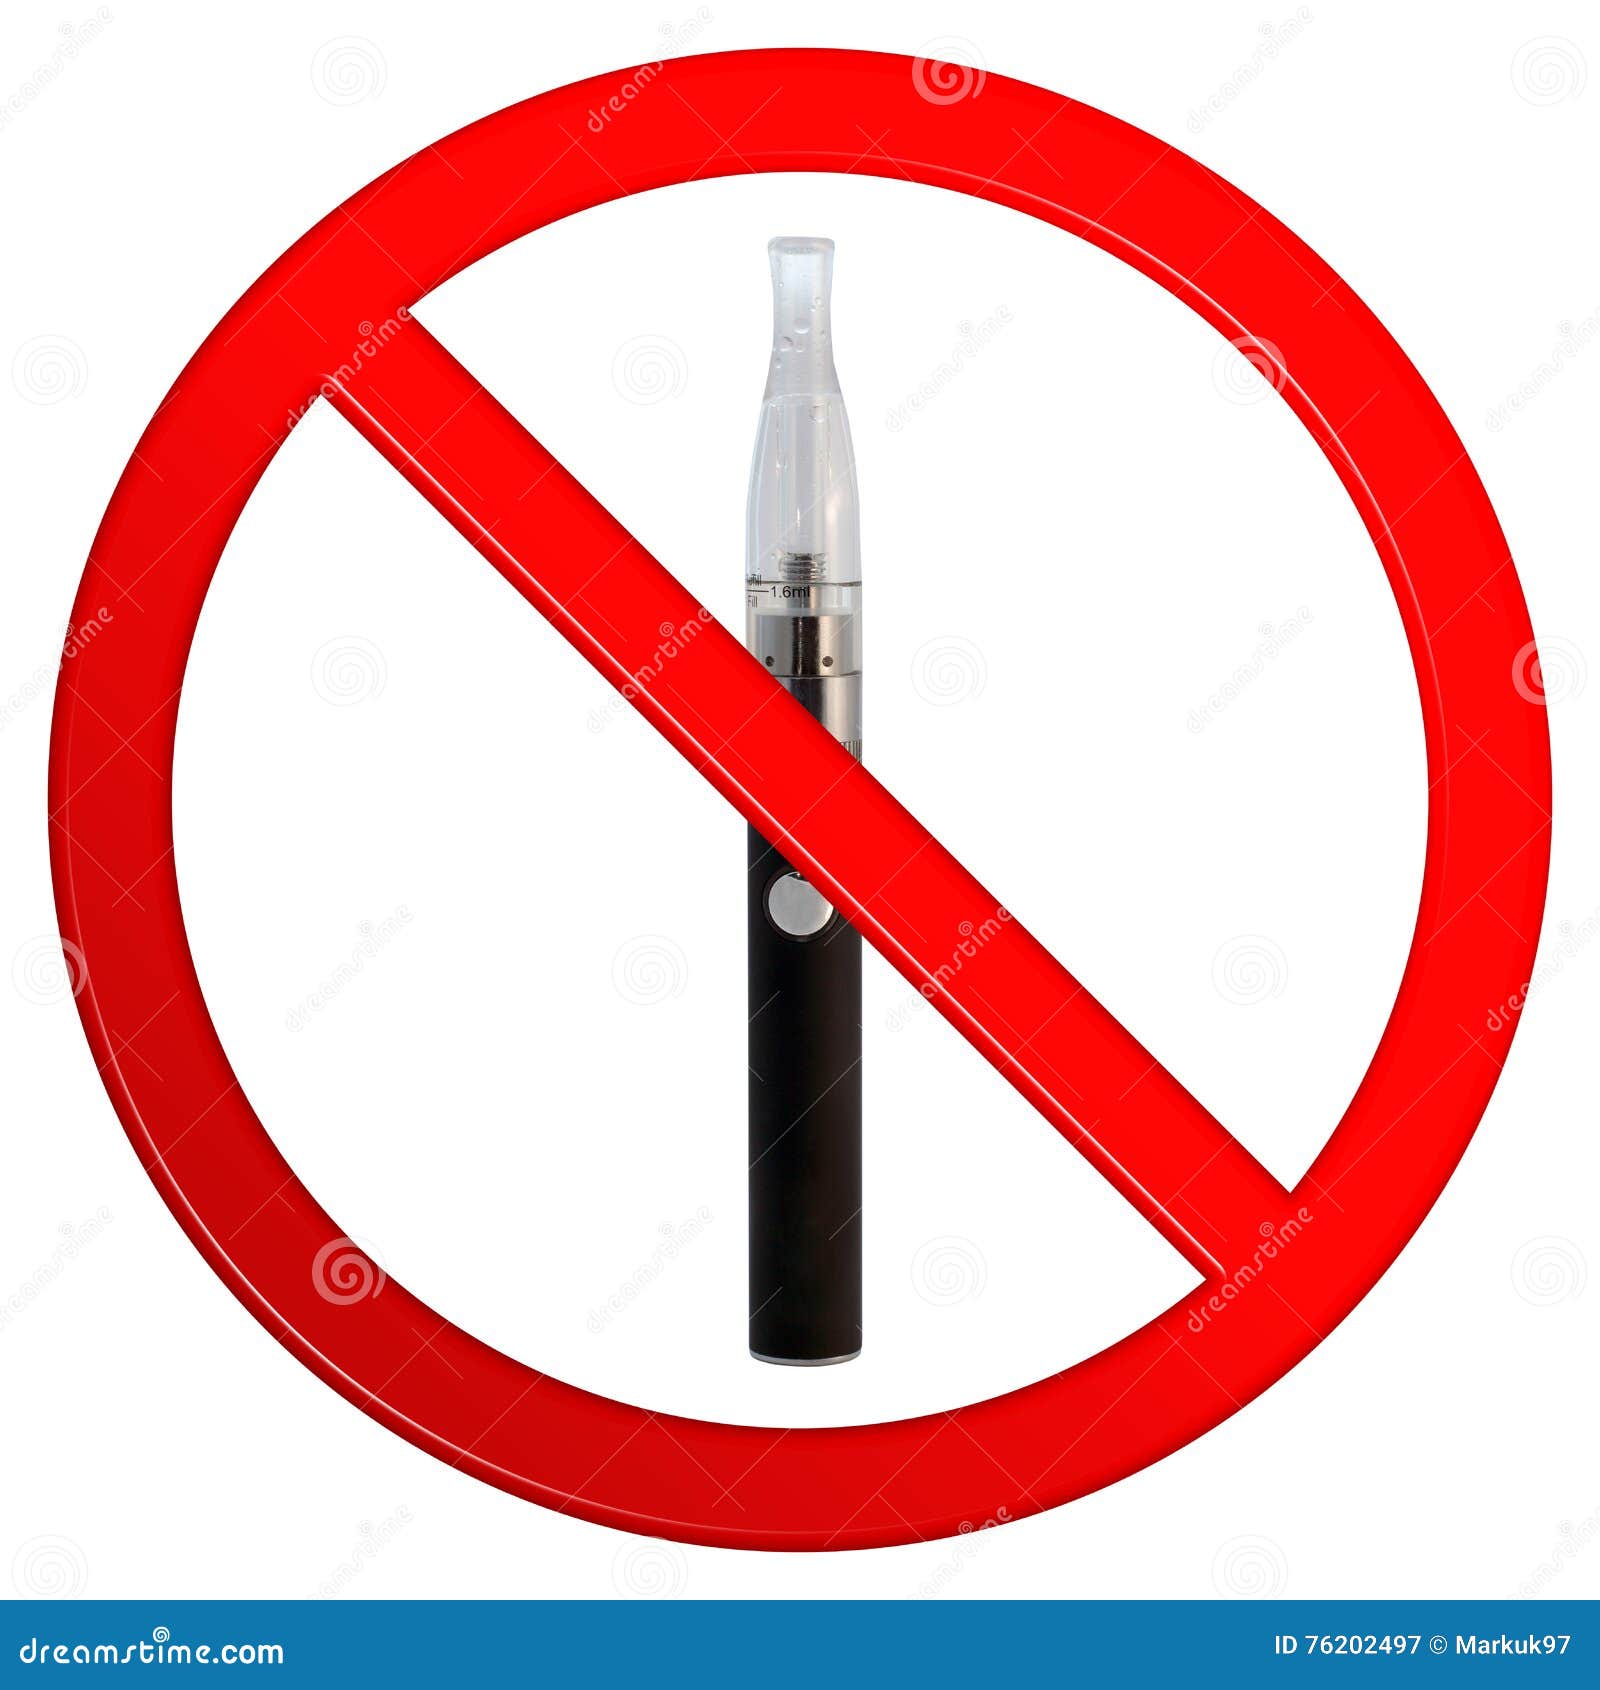 vaping not permitted sign